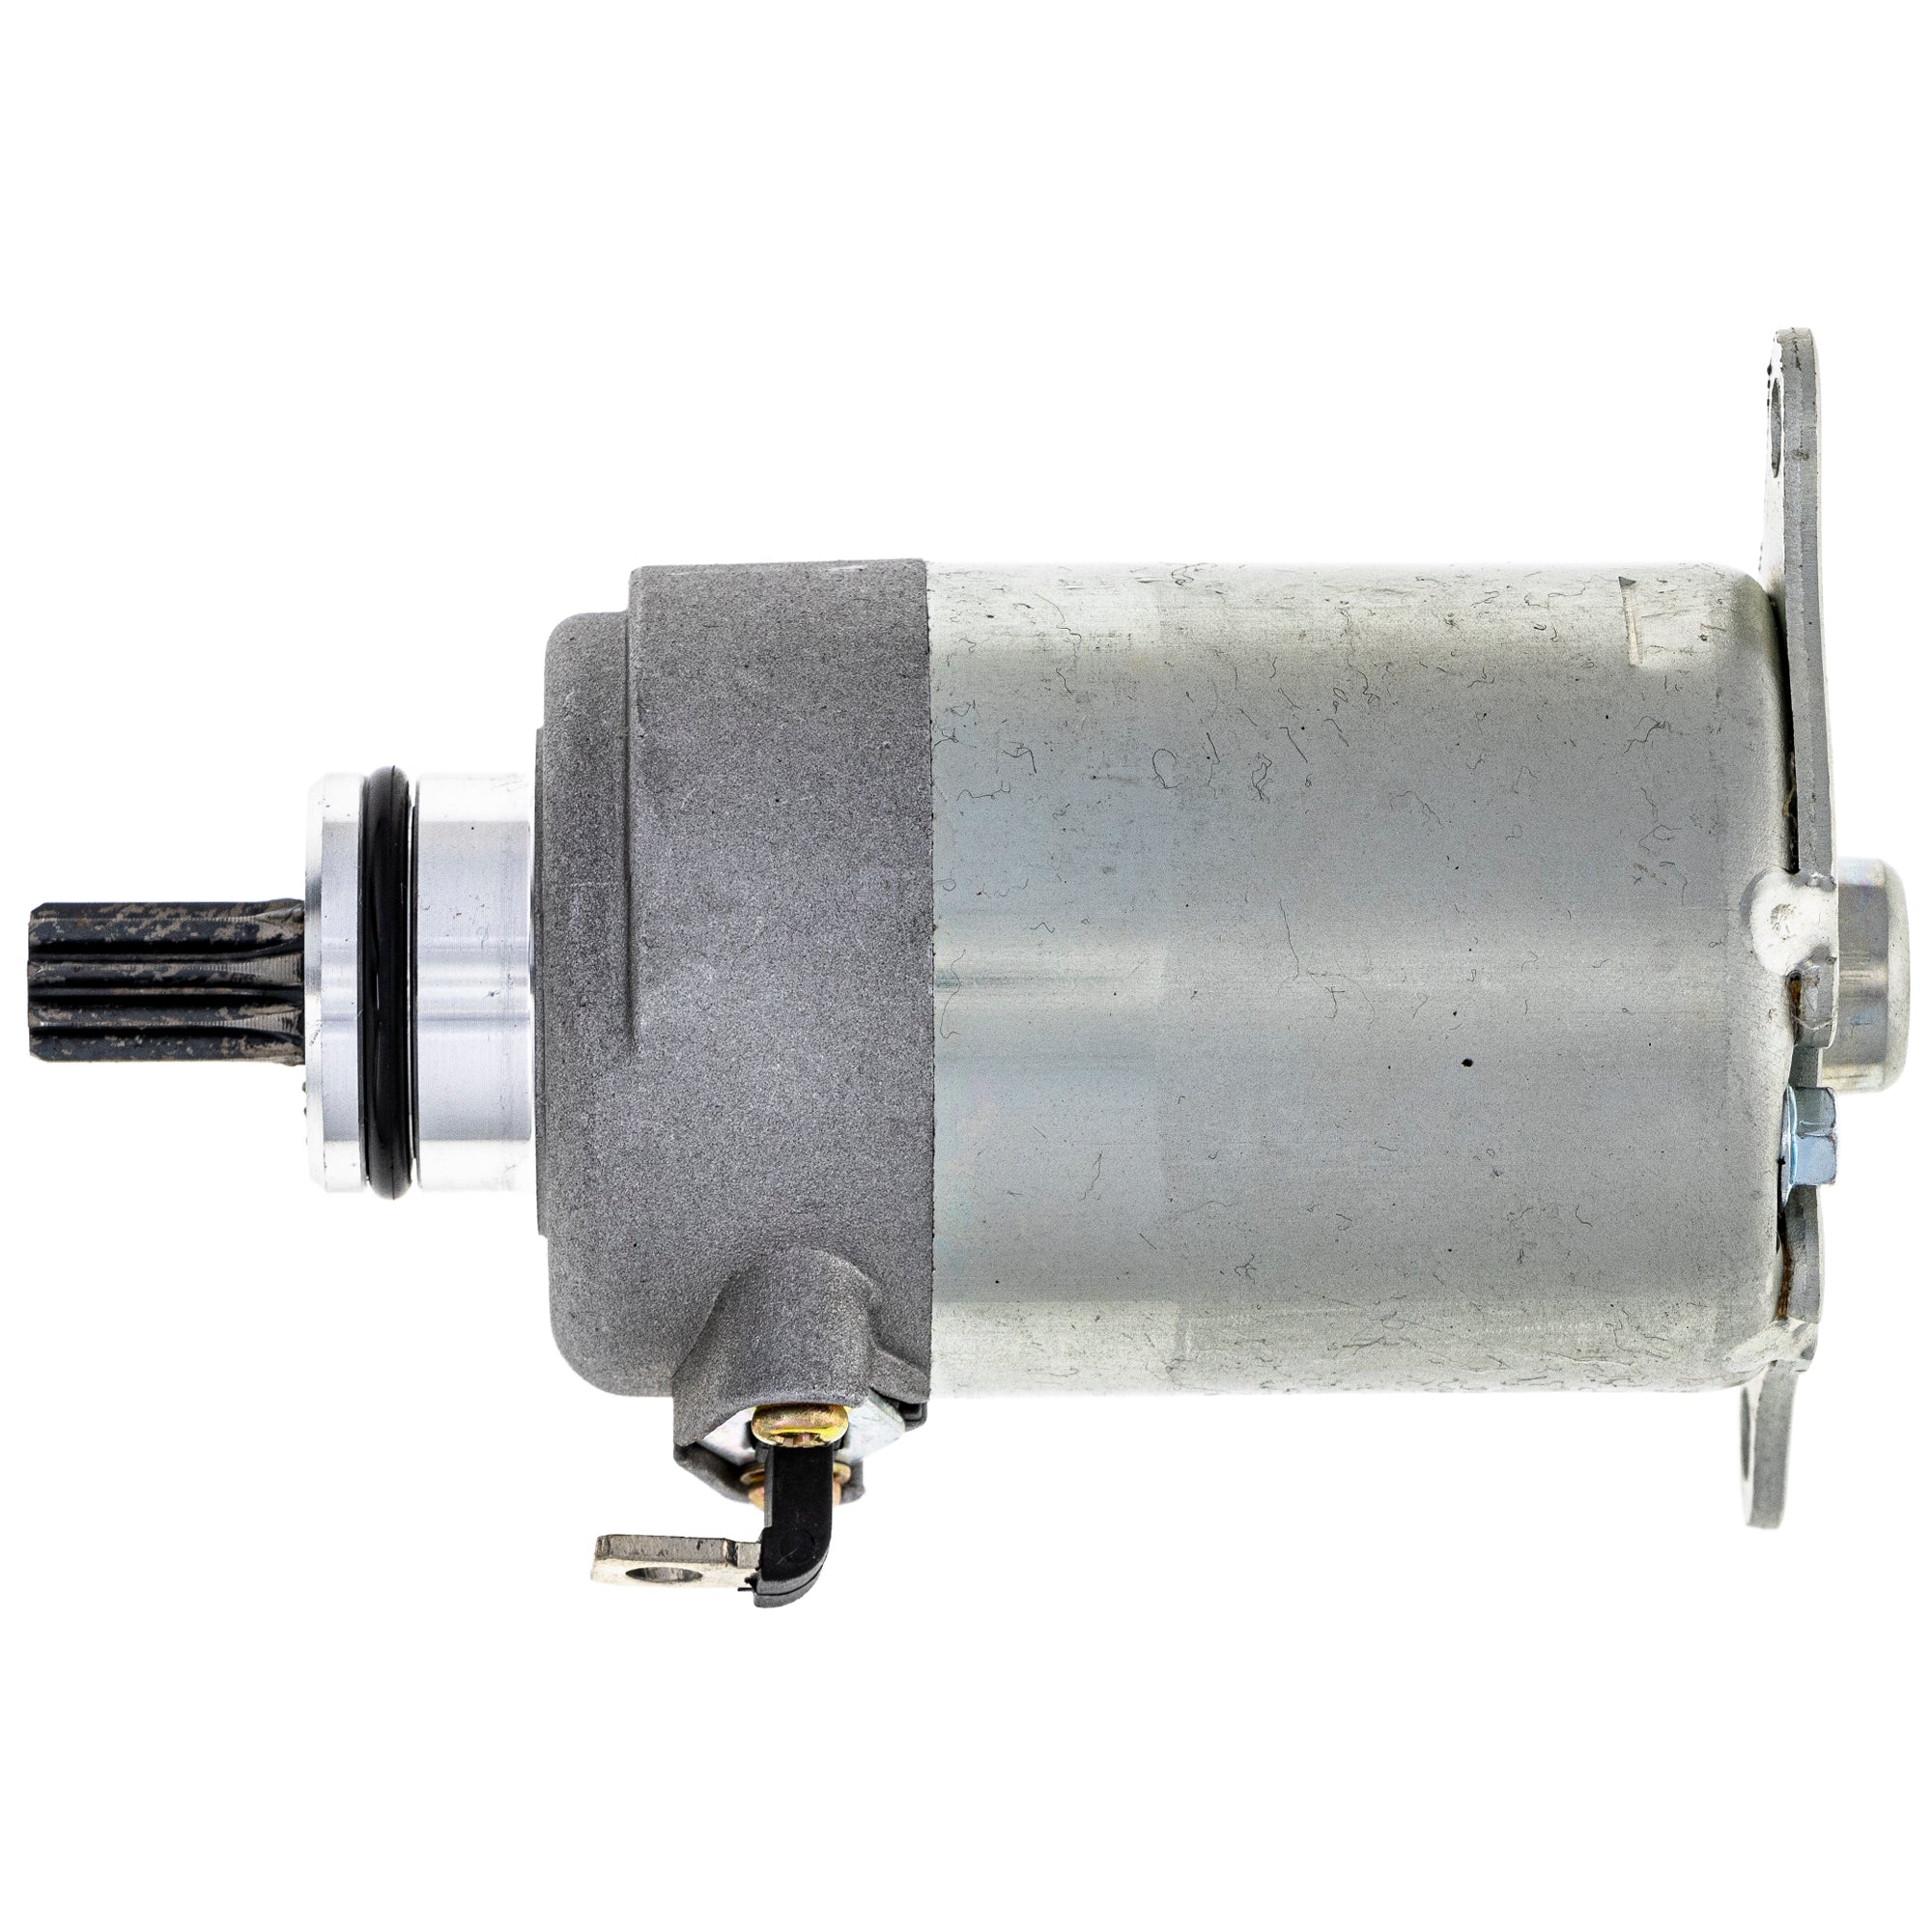 NICHE 519-CSM2490O Starter Motor Assembly for zOTHER